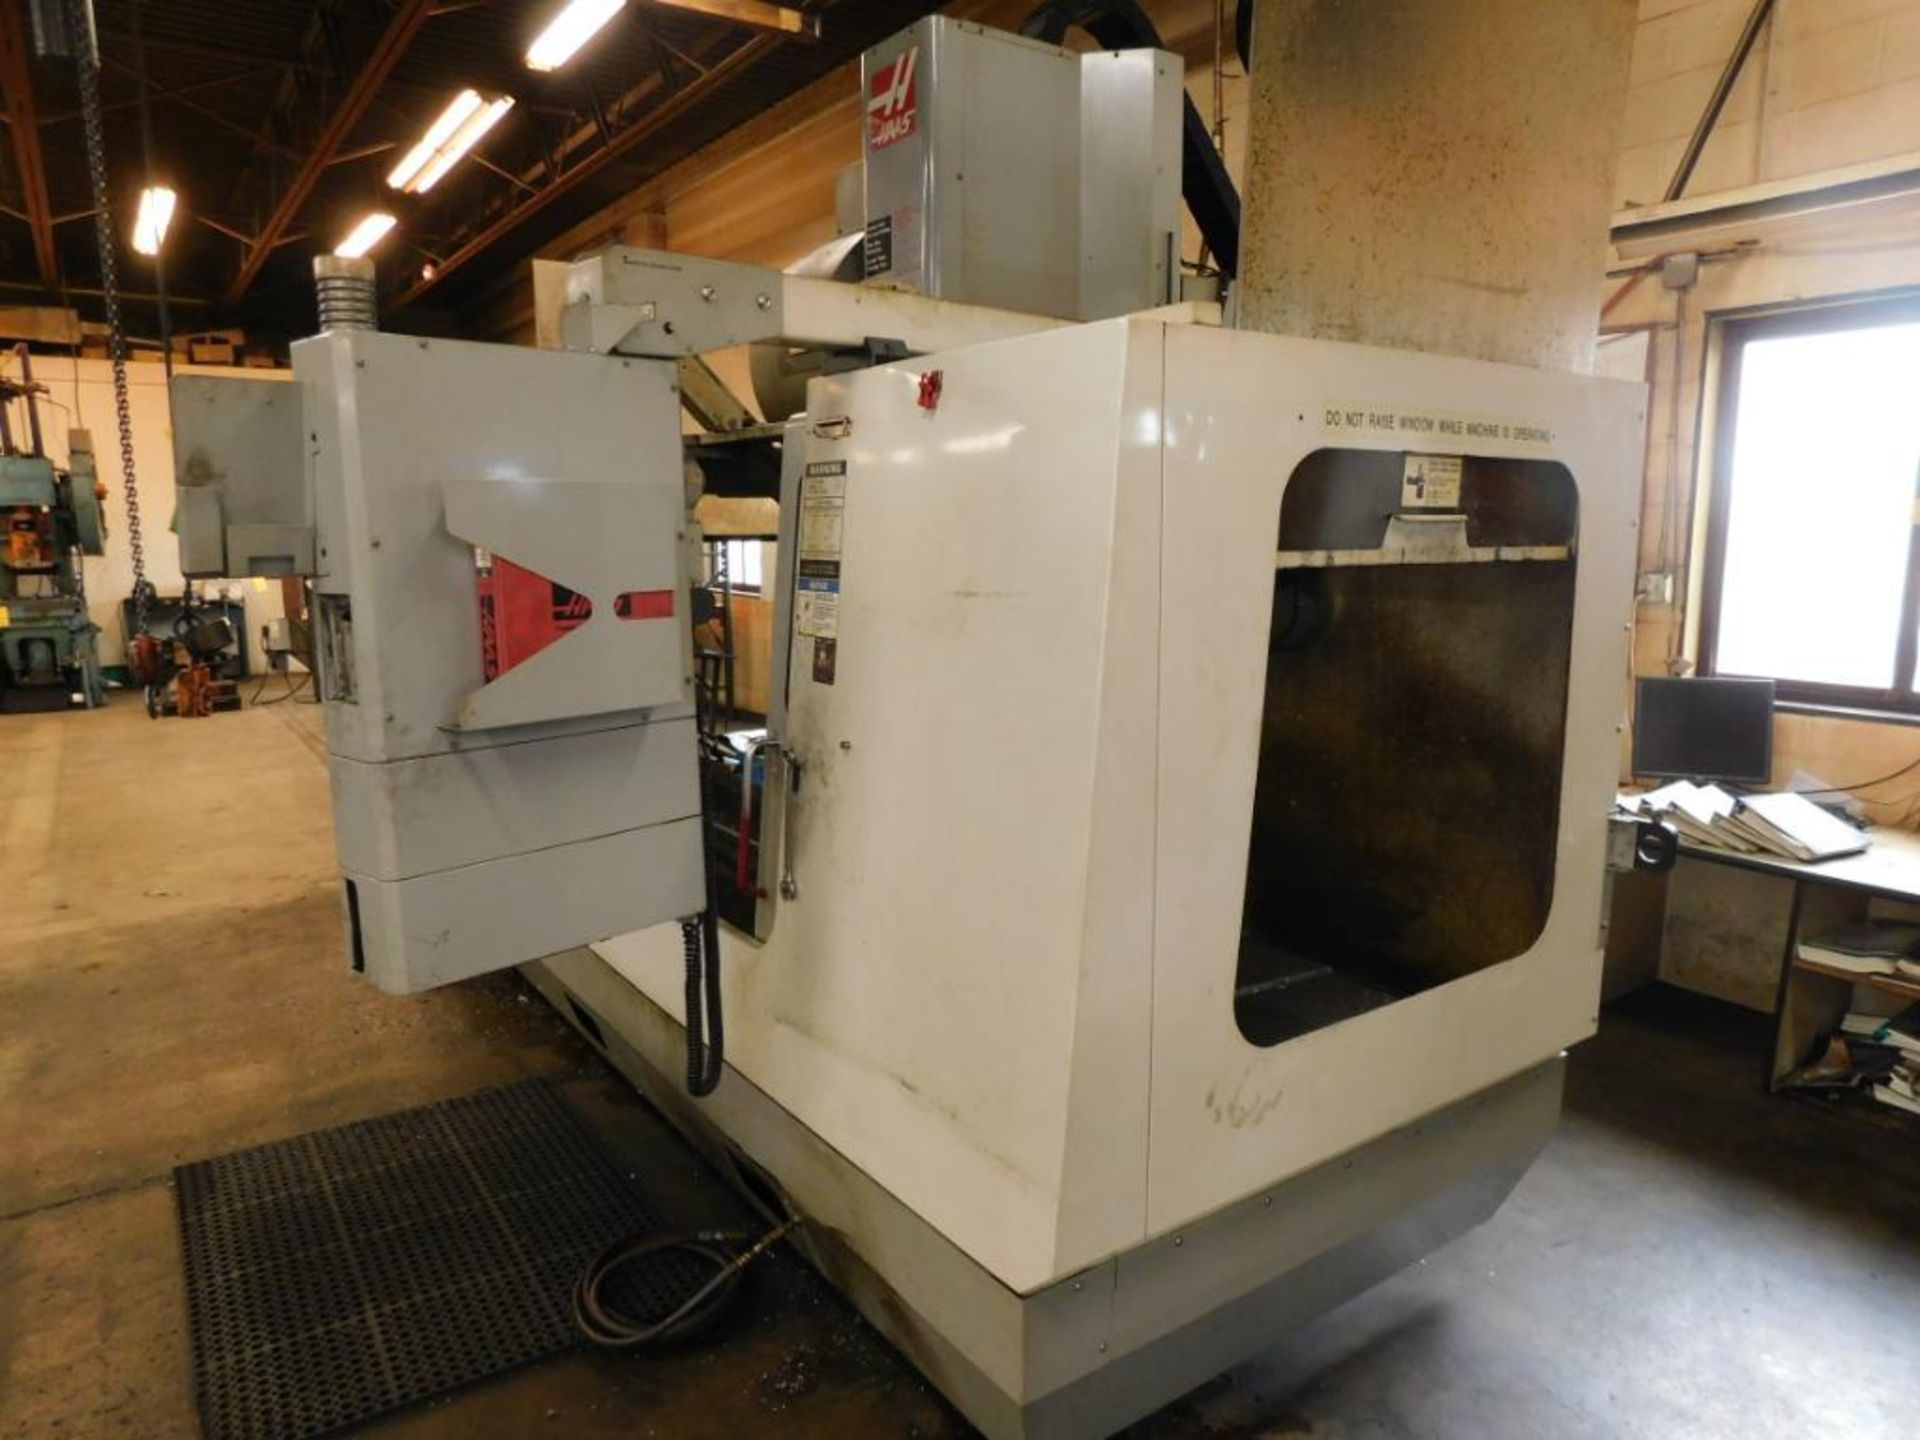 Haas CNC Vertical Machining Center Model VF-4B, S/N 38469 (2004), 50 in. X-Travel, 20 in. Y- - Image 3 of 6